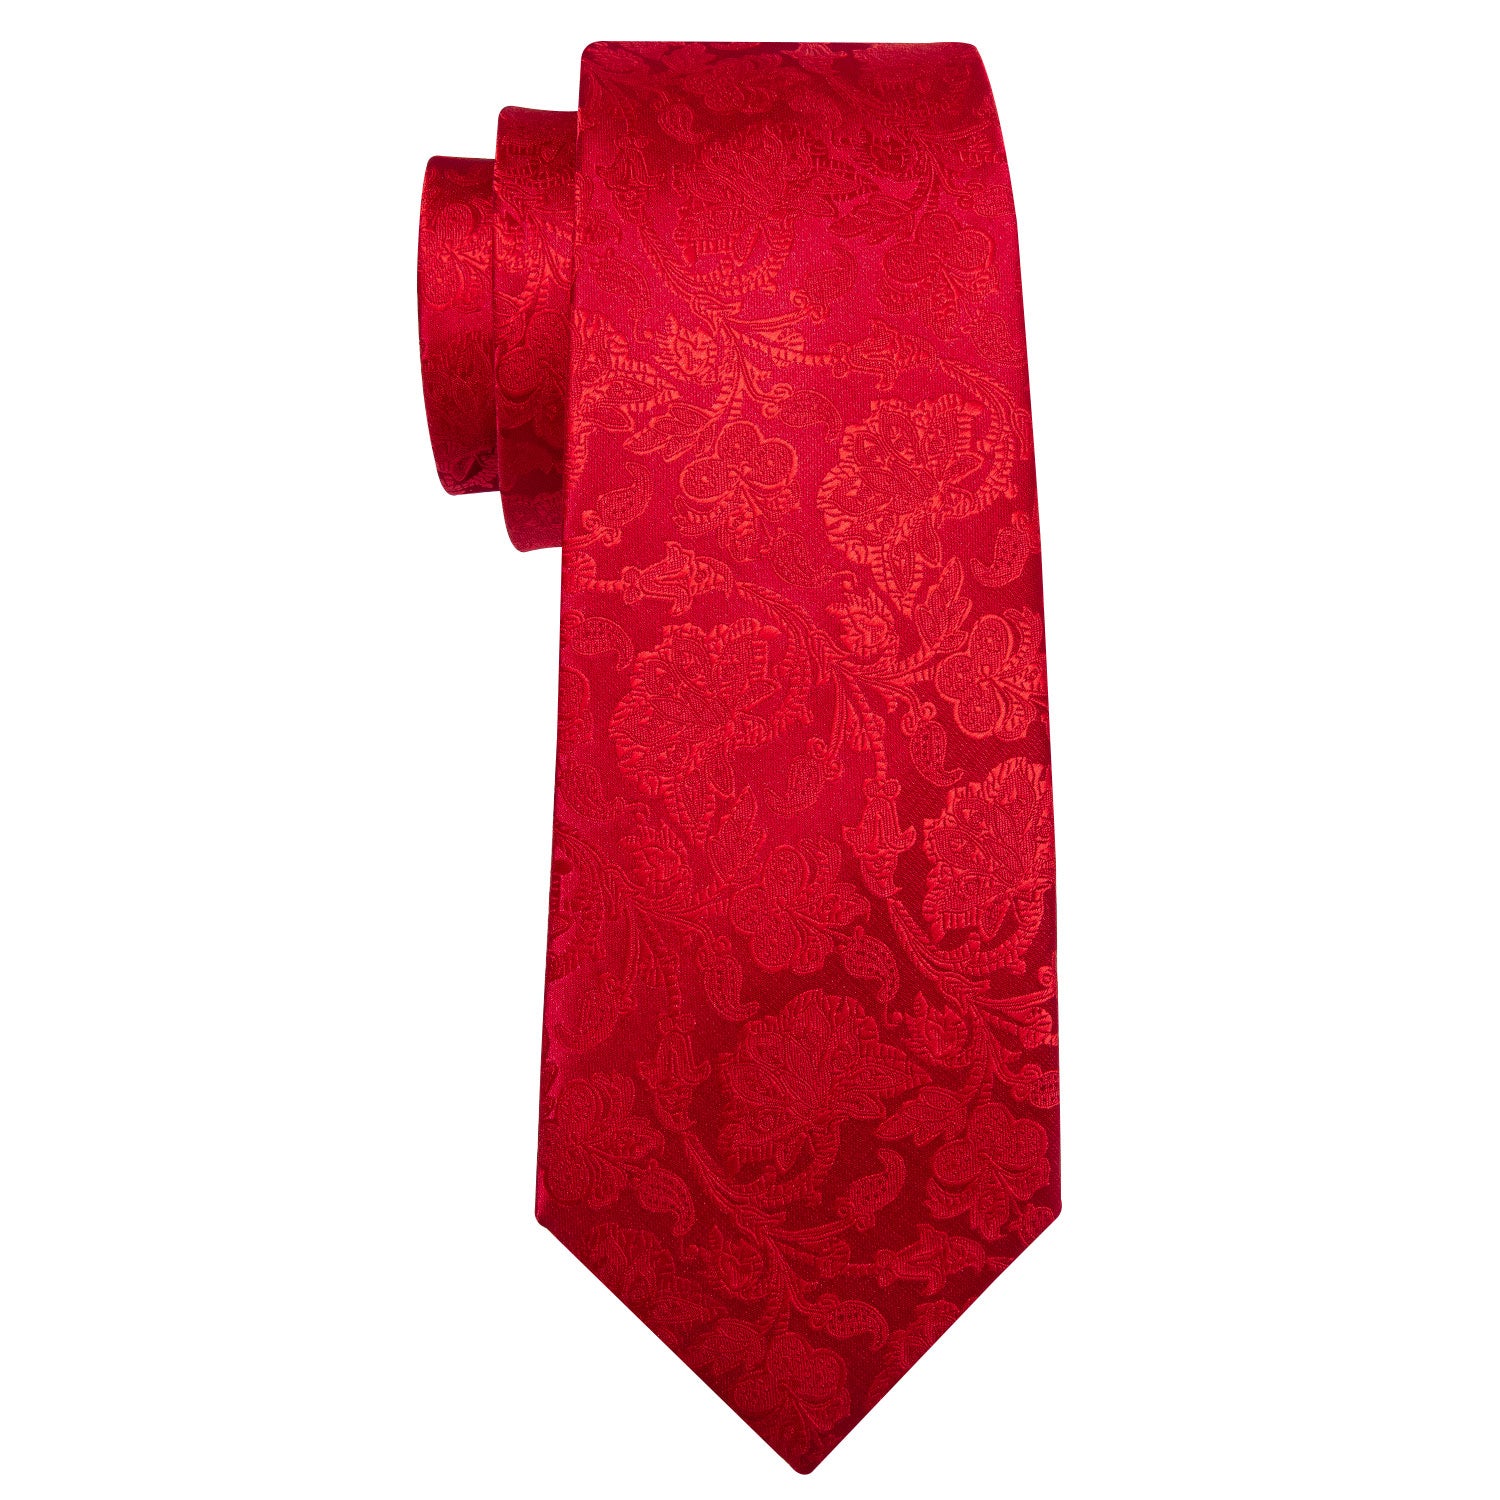 Red Floral Silk 63 inches Extra Long Tie Hanky Cufflinks Set